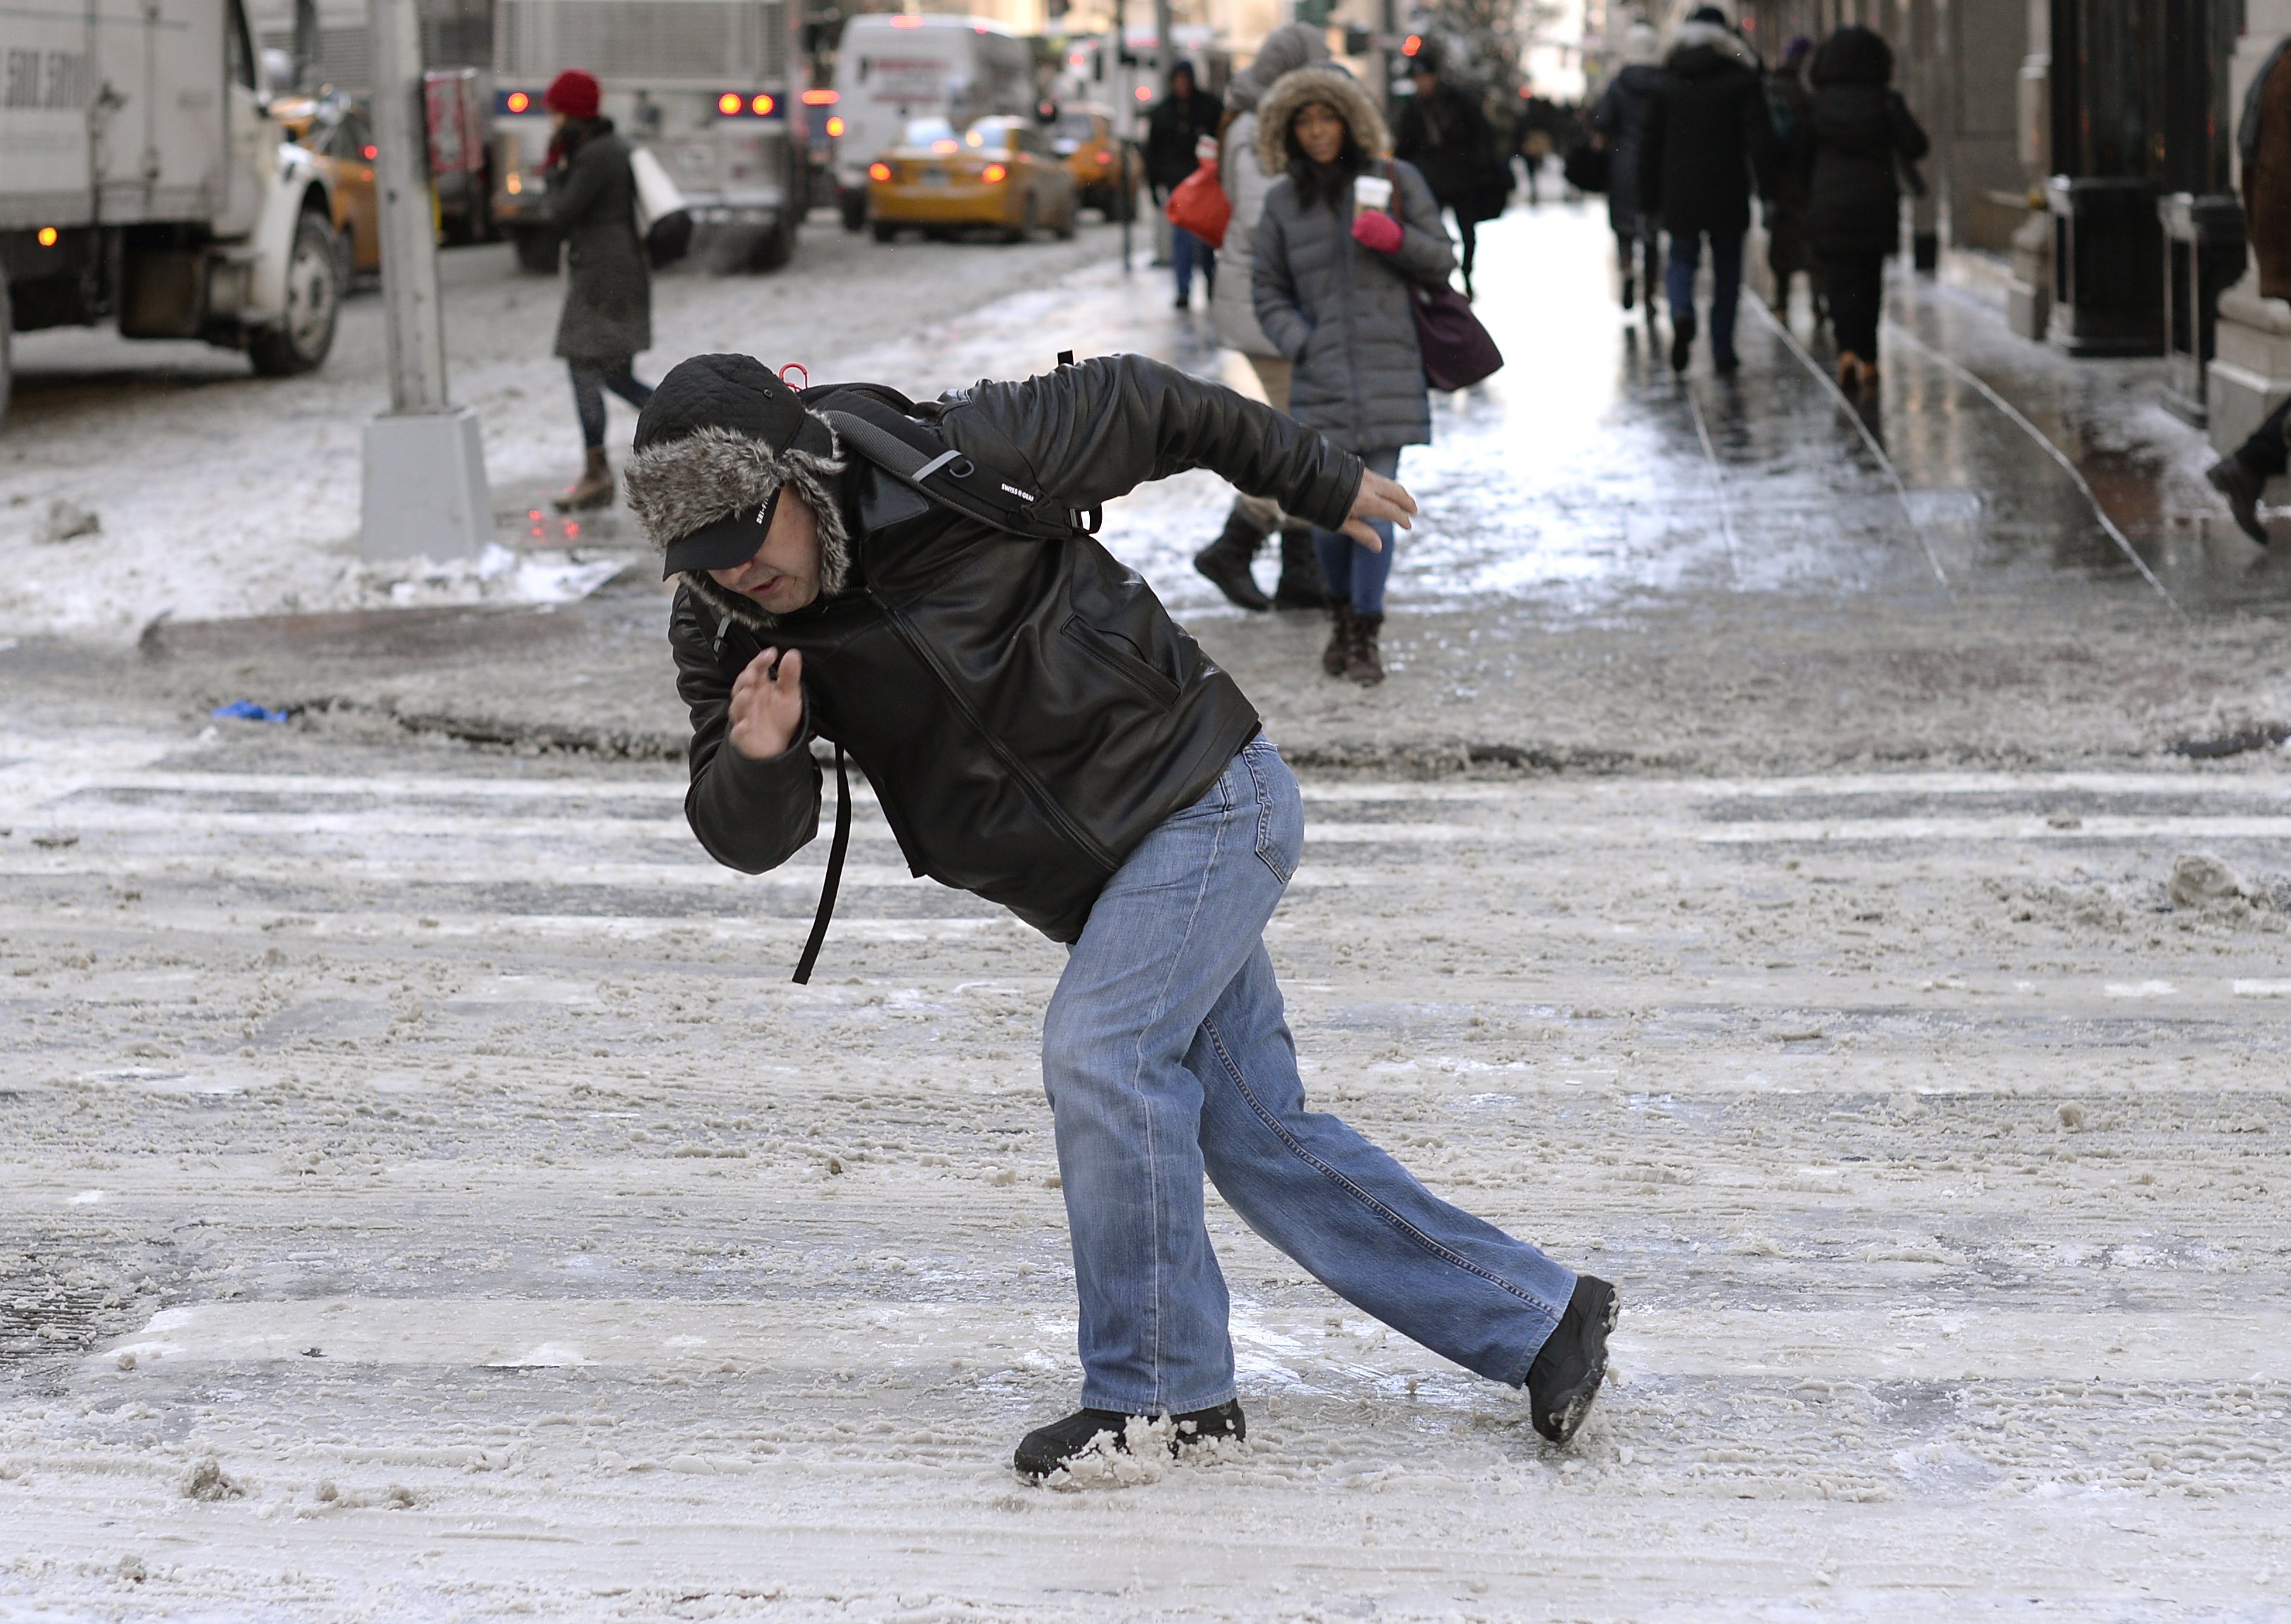 People Slipping On Ice Funny Photos Of People Falling In